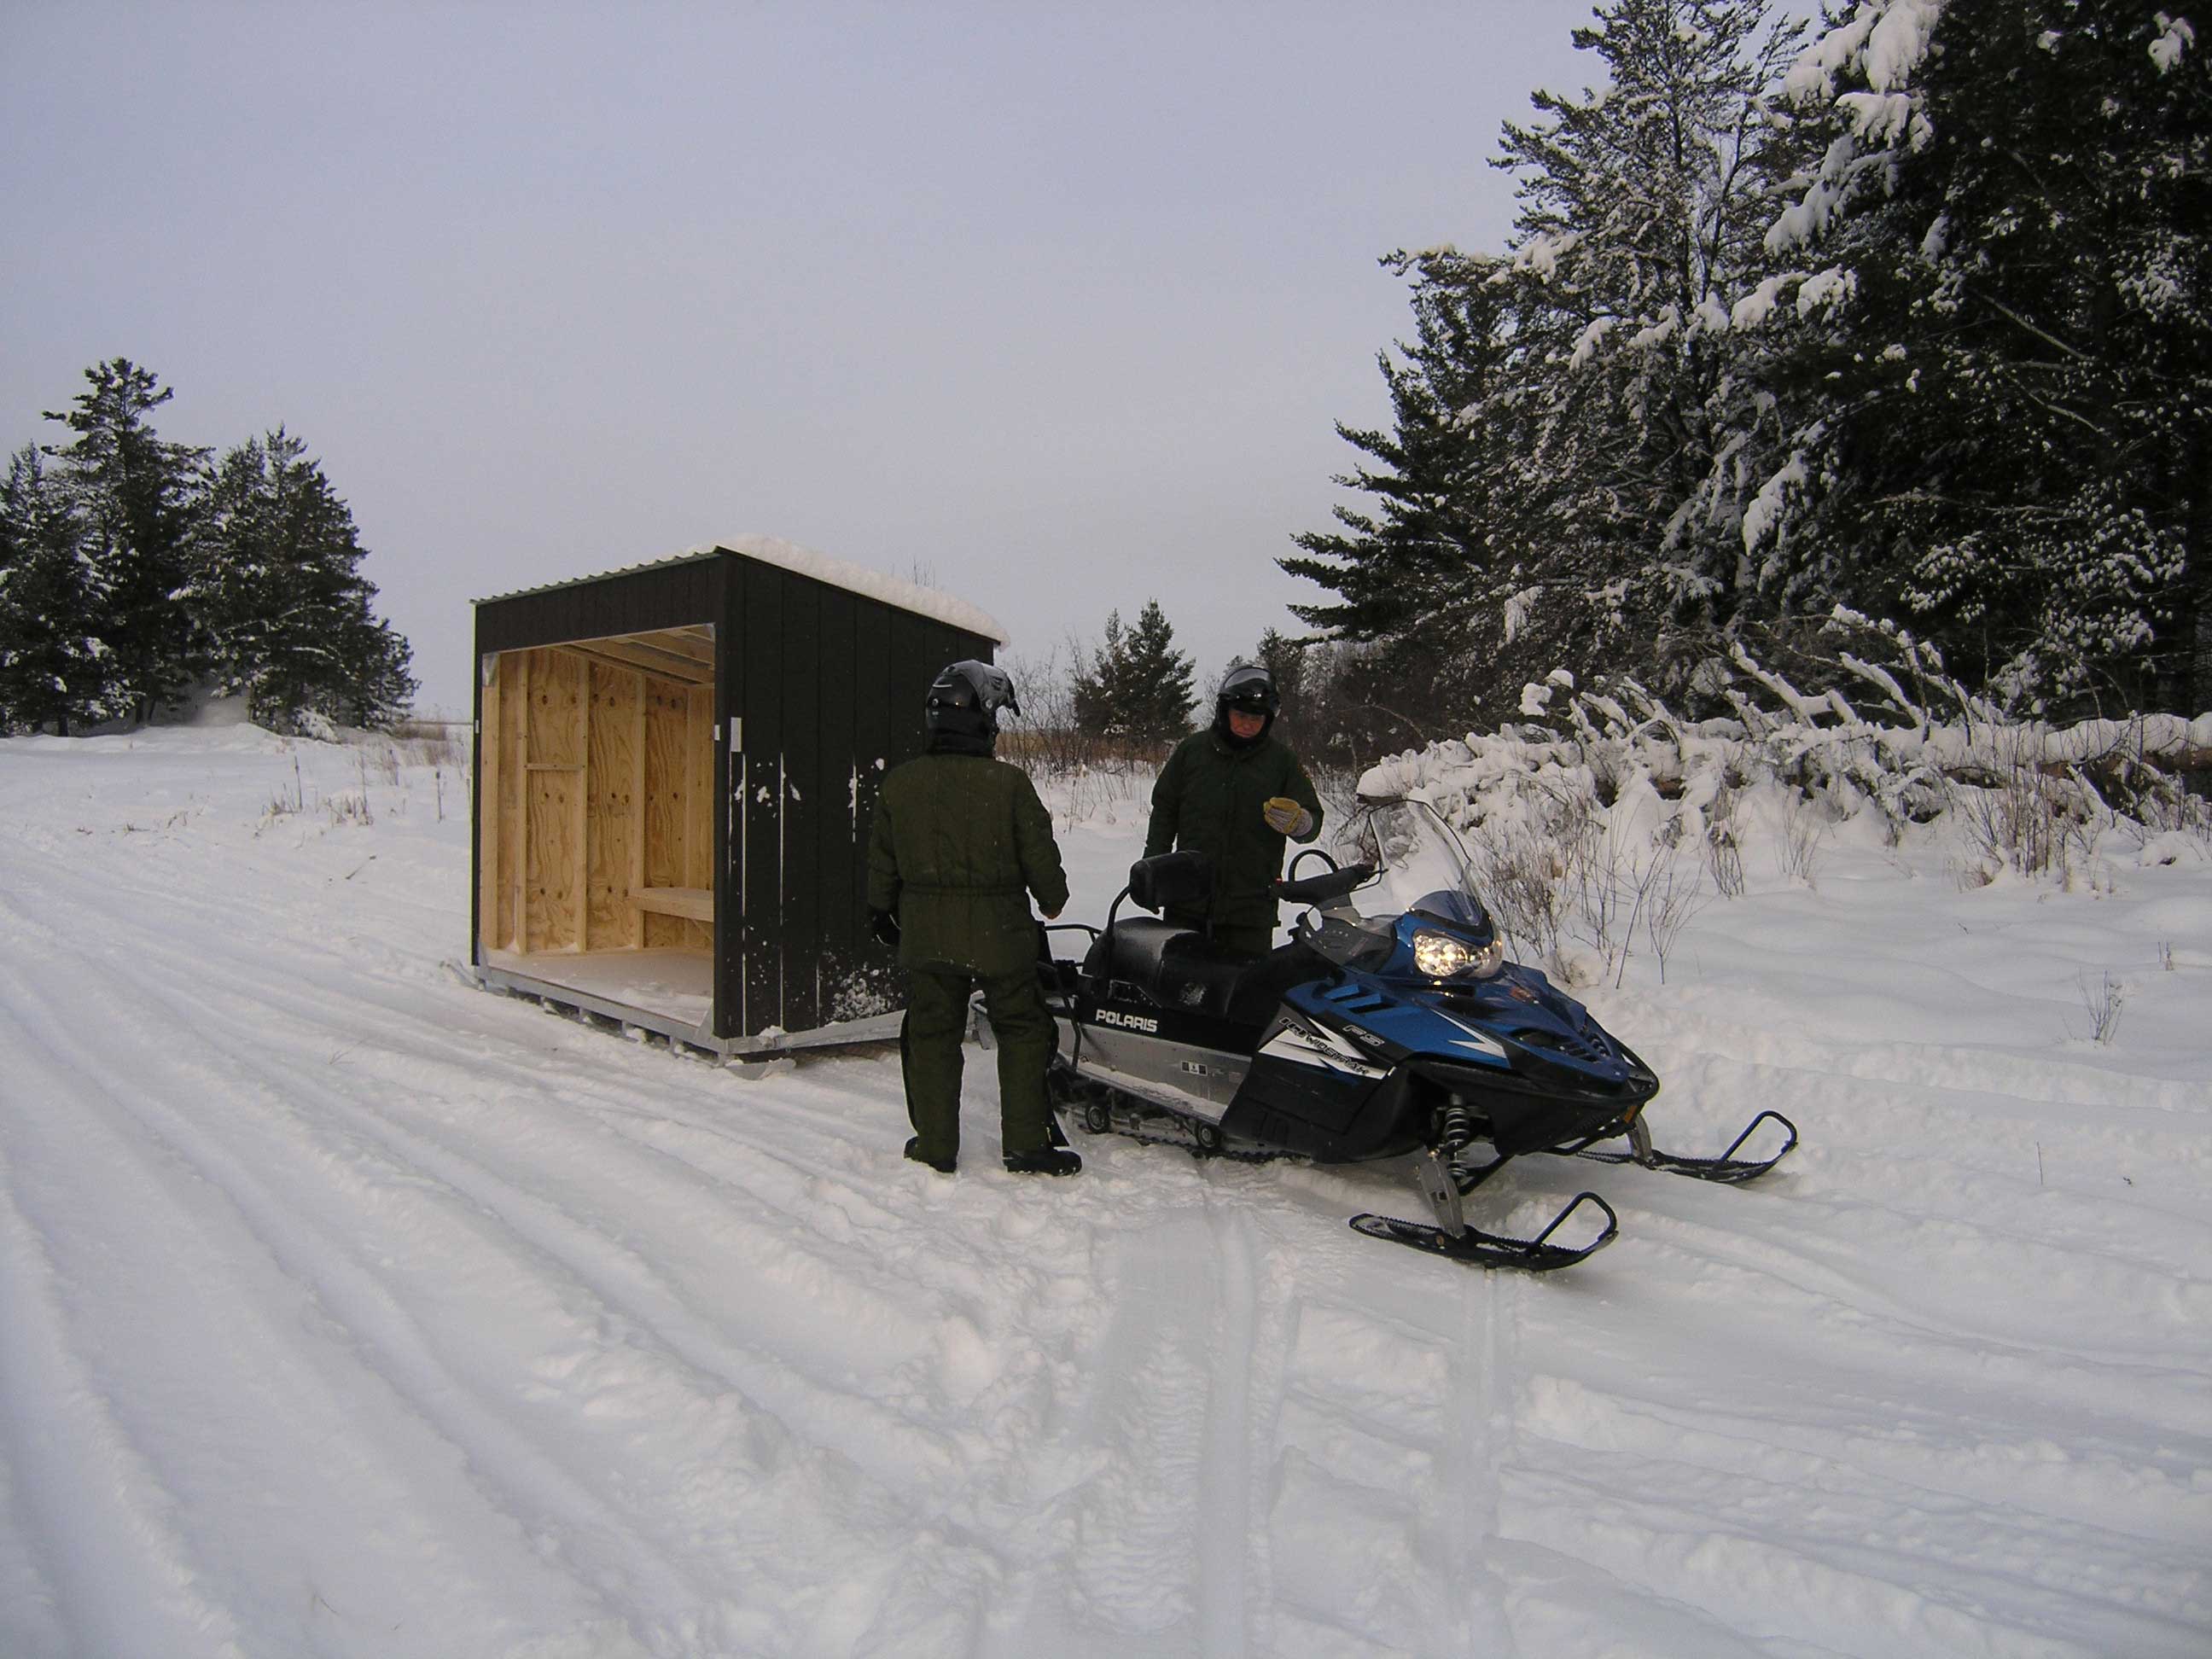 Rangers delivering a Shelter with Sled